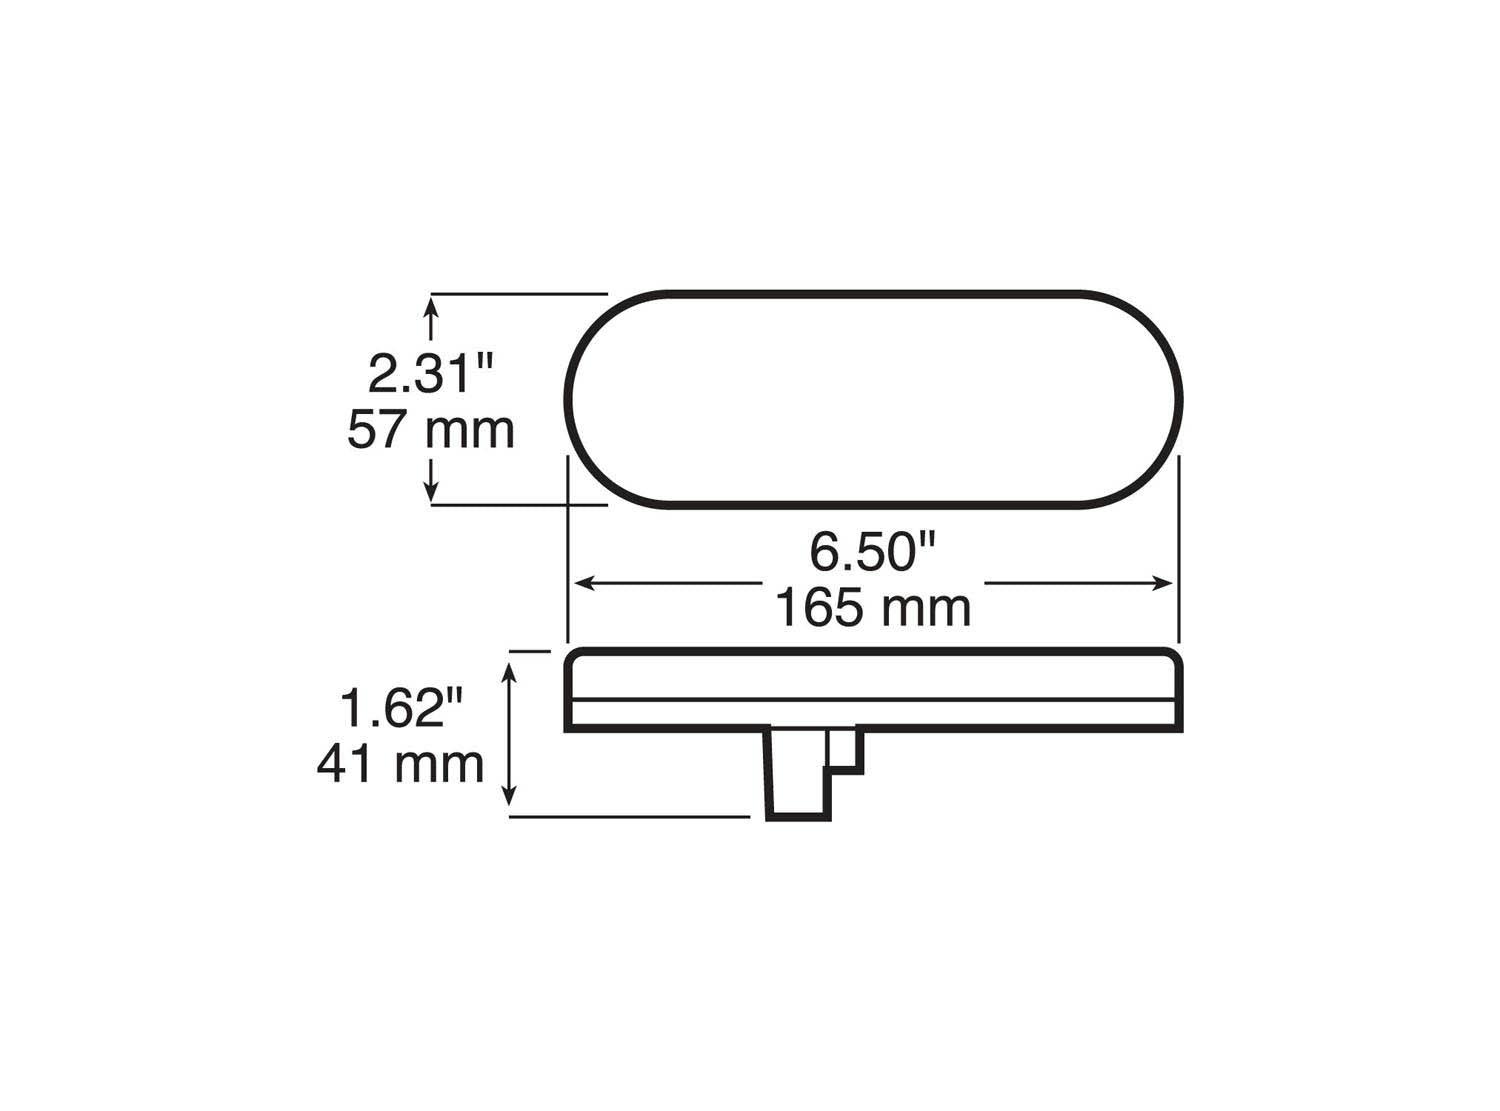 LED Front Park & Turn, 22 Diode, PL3 Housing, Grommet-Mount, 6.5"X2.25" 12V, amber (Pack of 6) - 821_line_dual_2view-BX5_7f831b21-16ff-410d-9f83-67e3e8384a6b